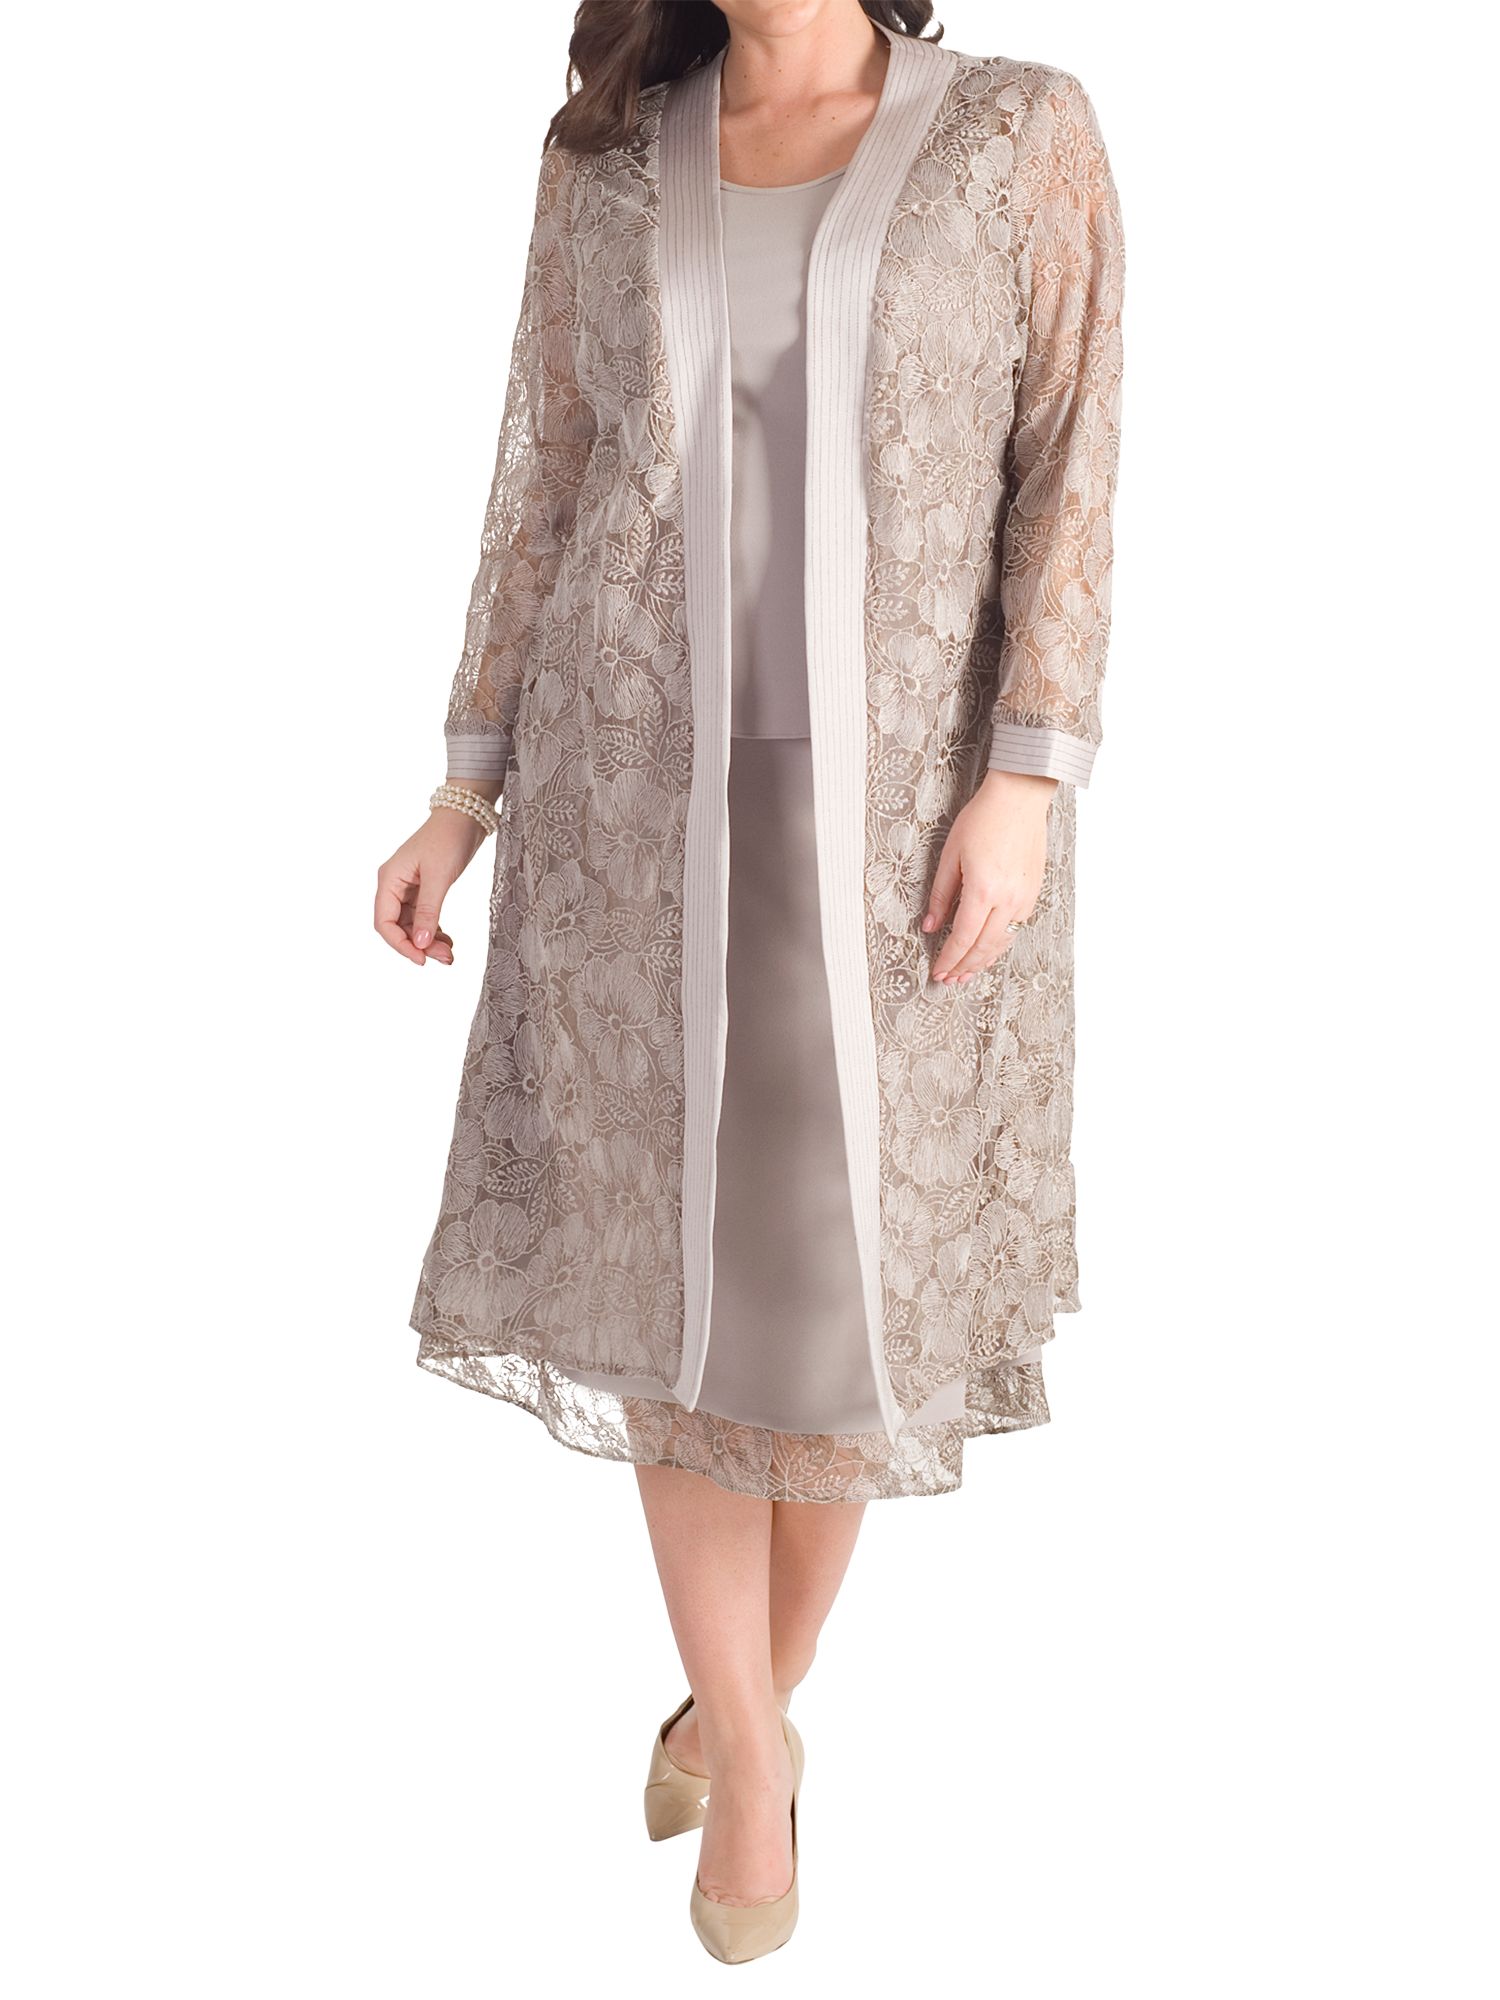 Chesca Embroidered Lace Coat, Mink at John Lewis & Partners